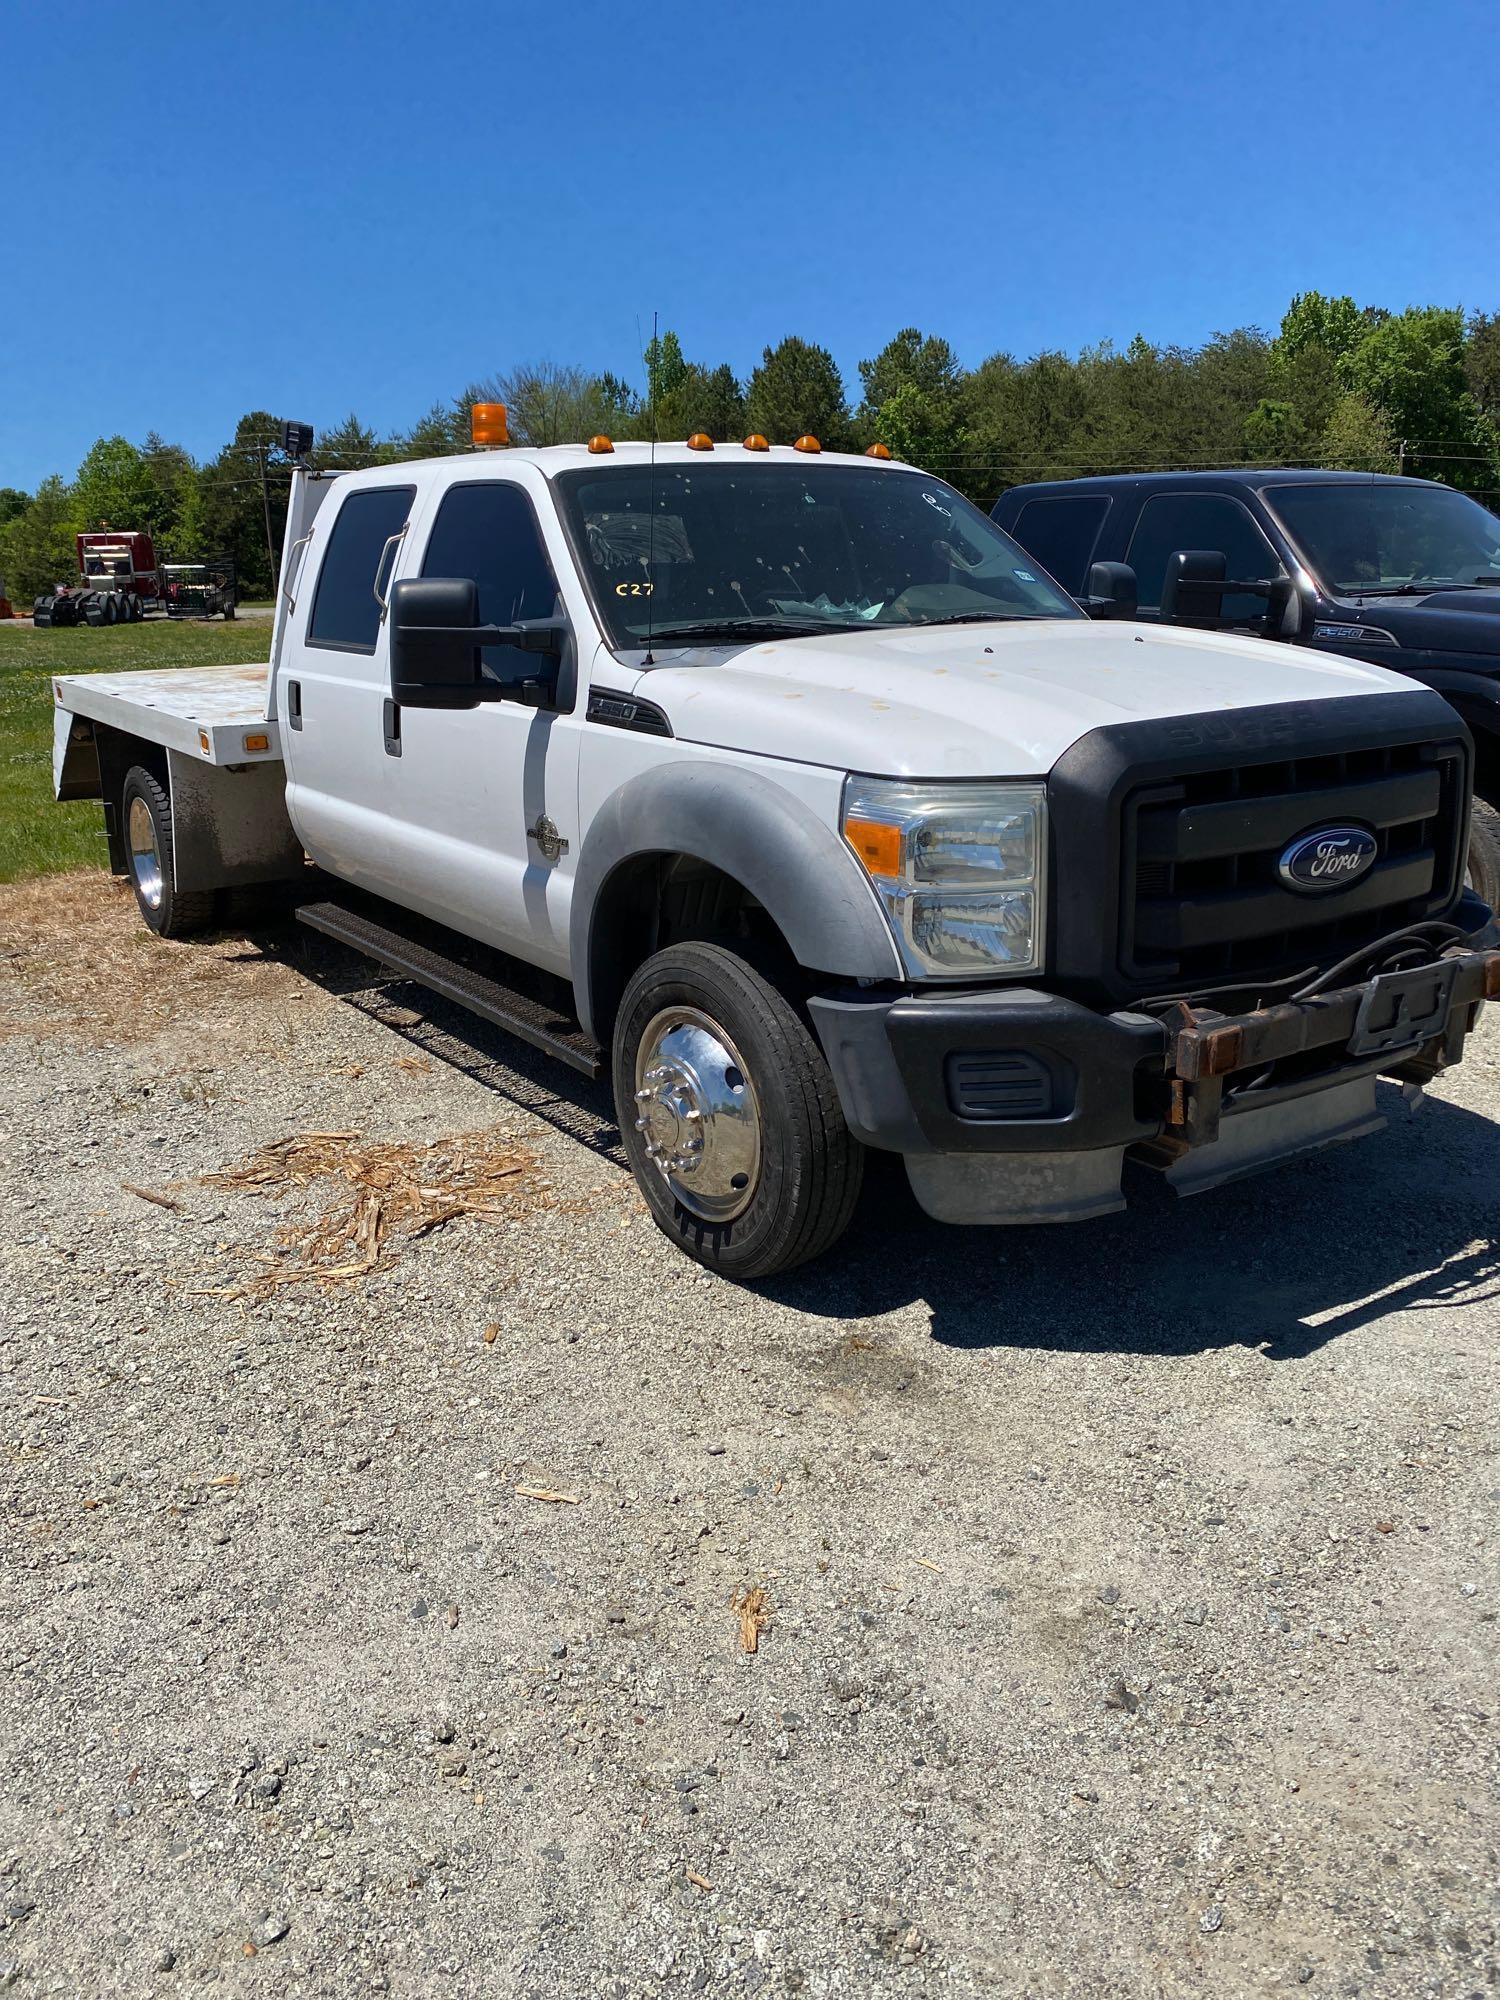 2012 Ford F550 4x4 Dually Crew Cab Flatbed Truck